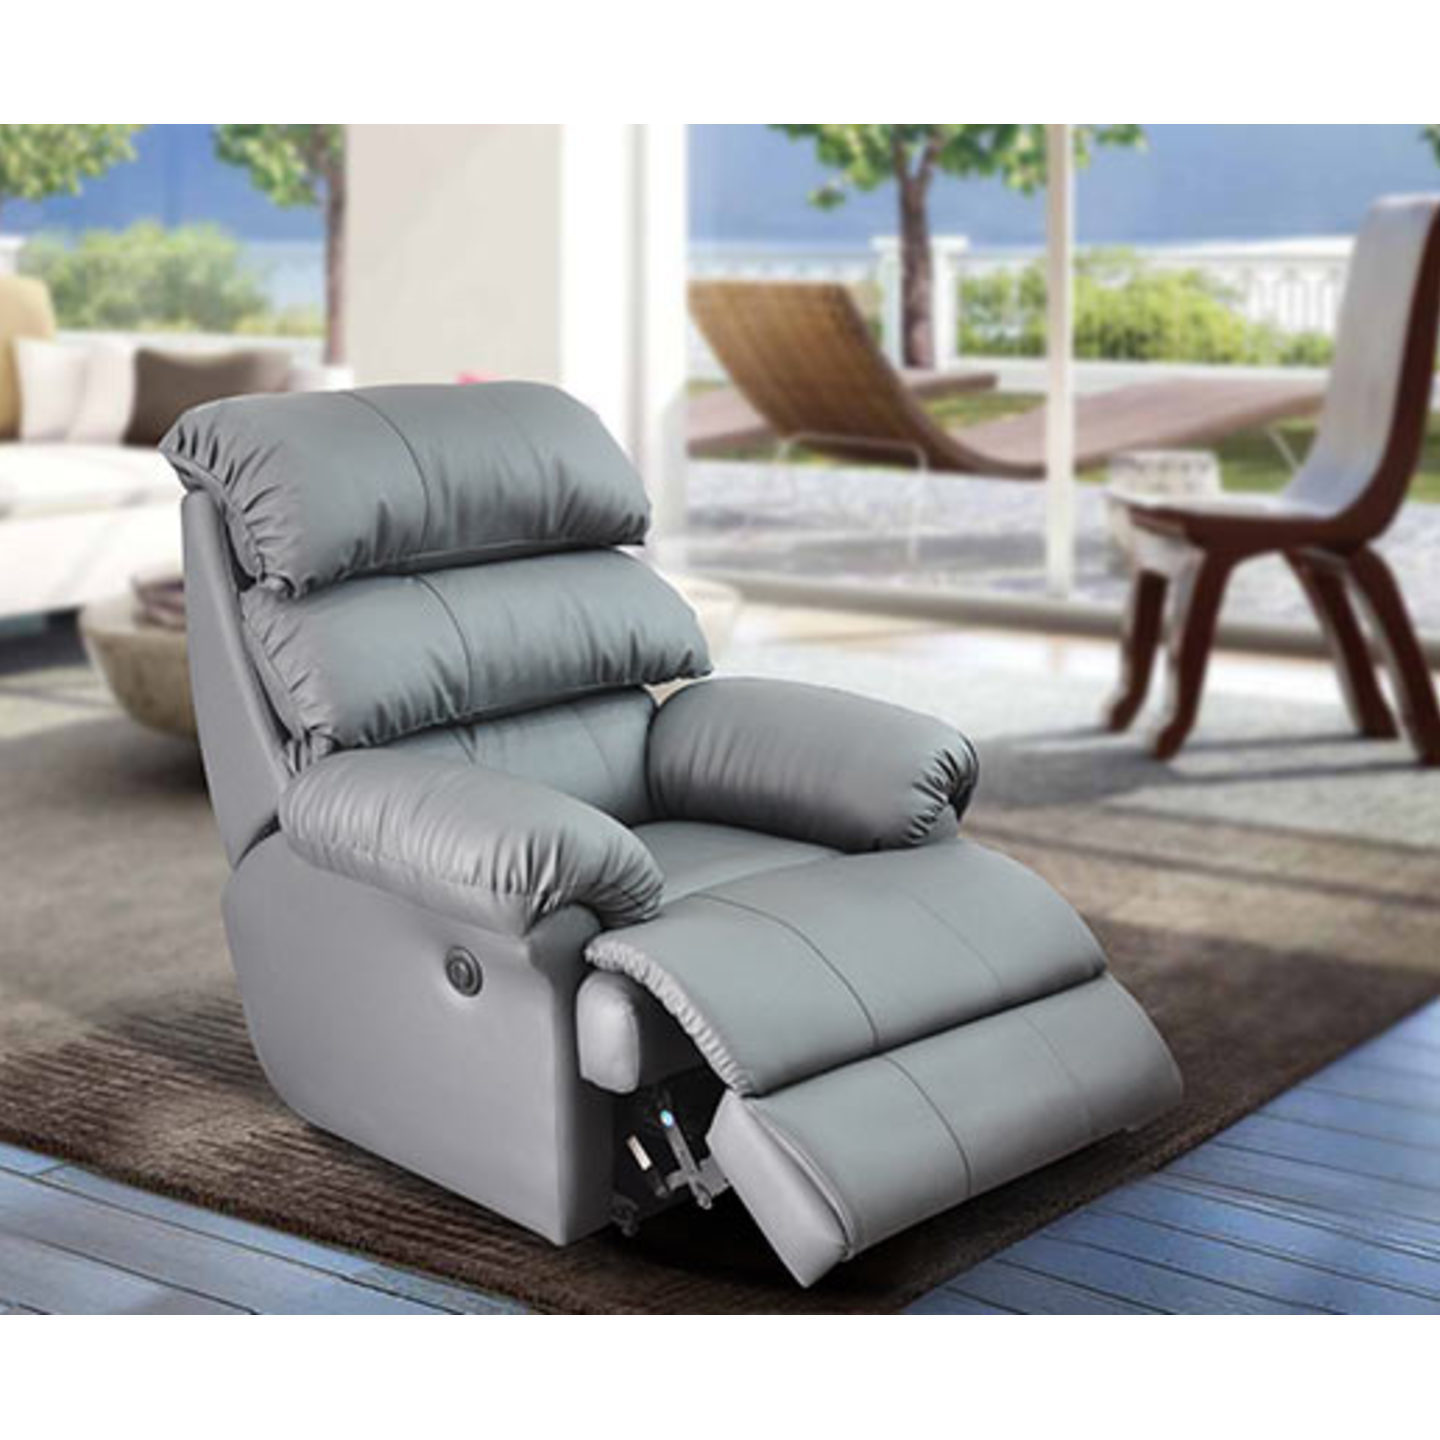 LN Recliner Chair Otium Electronic System In Grey Colour